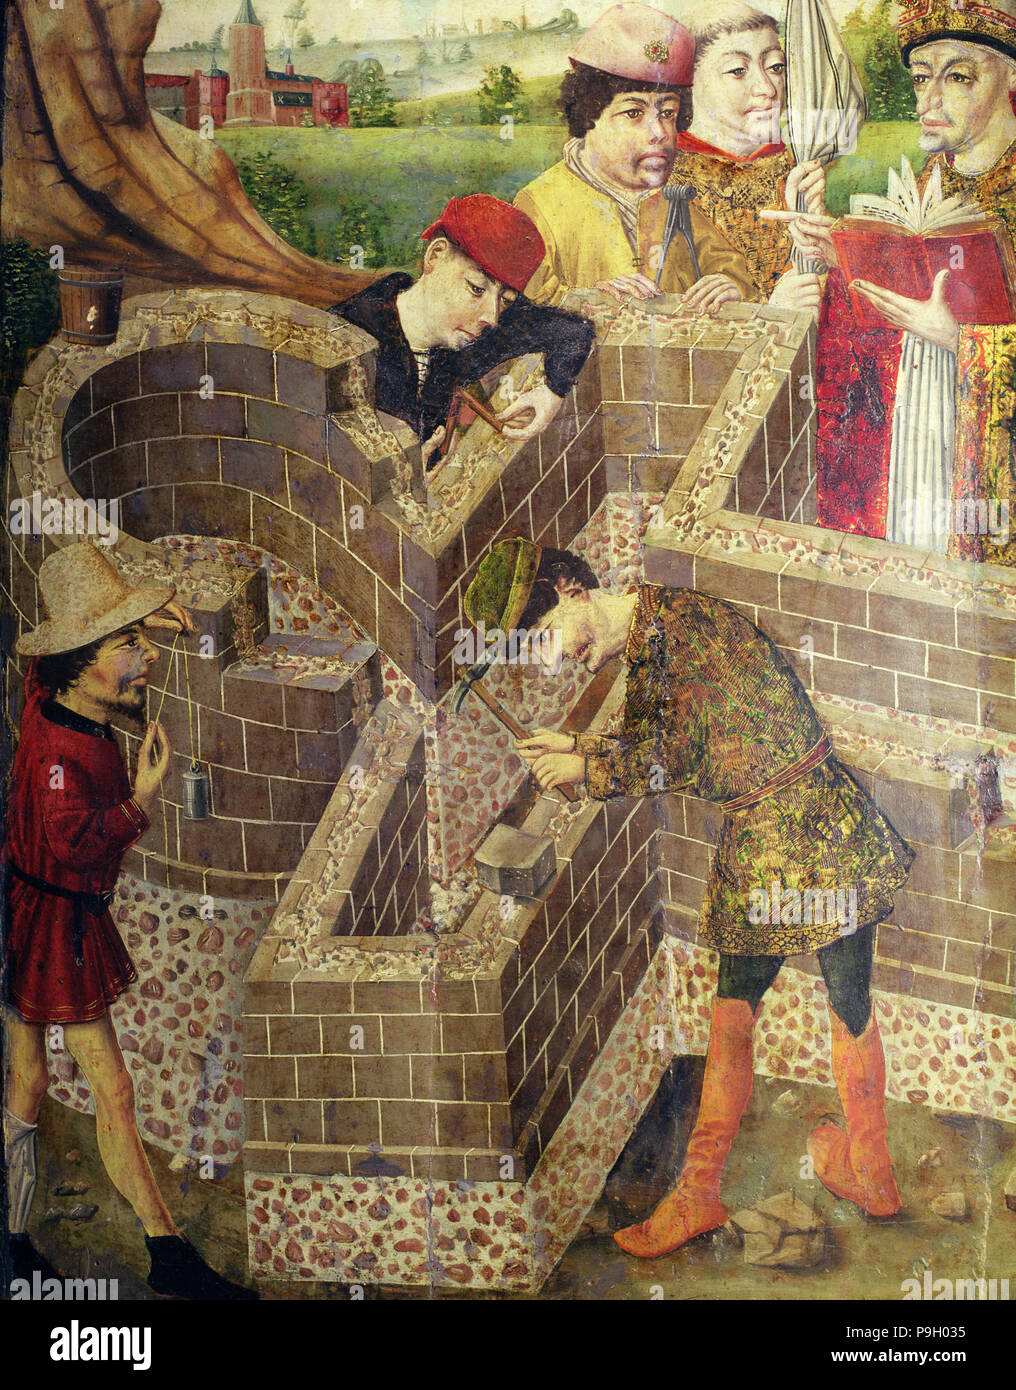 Building a church, detail from the Painting 'Church of San Miguel', panel painting. Stock Photo